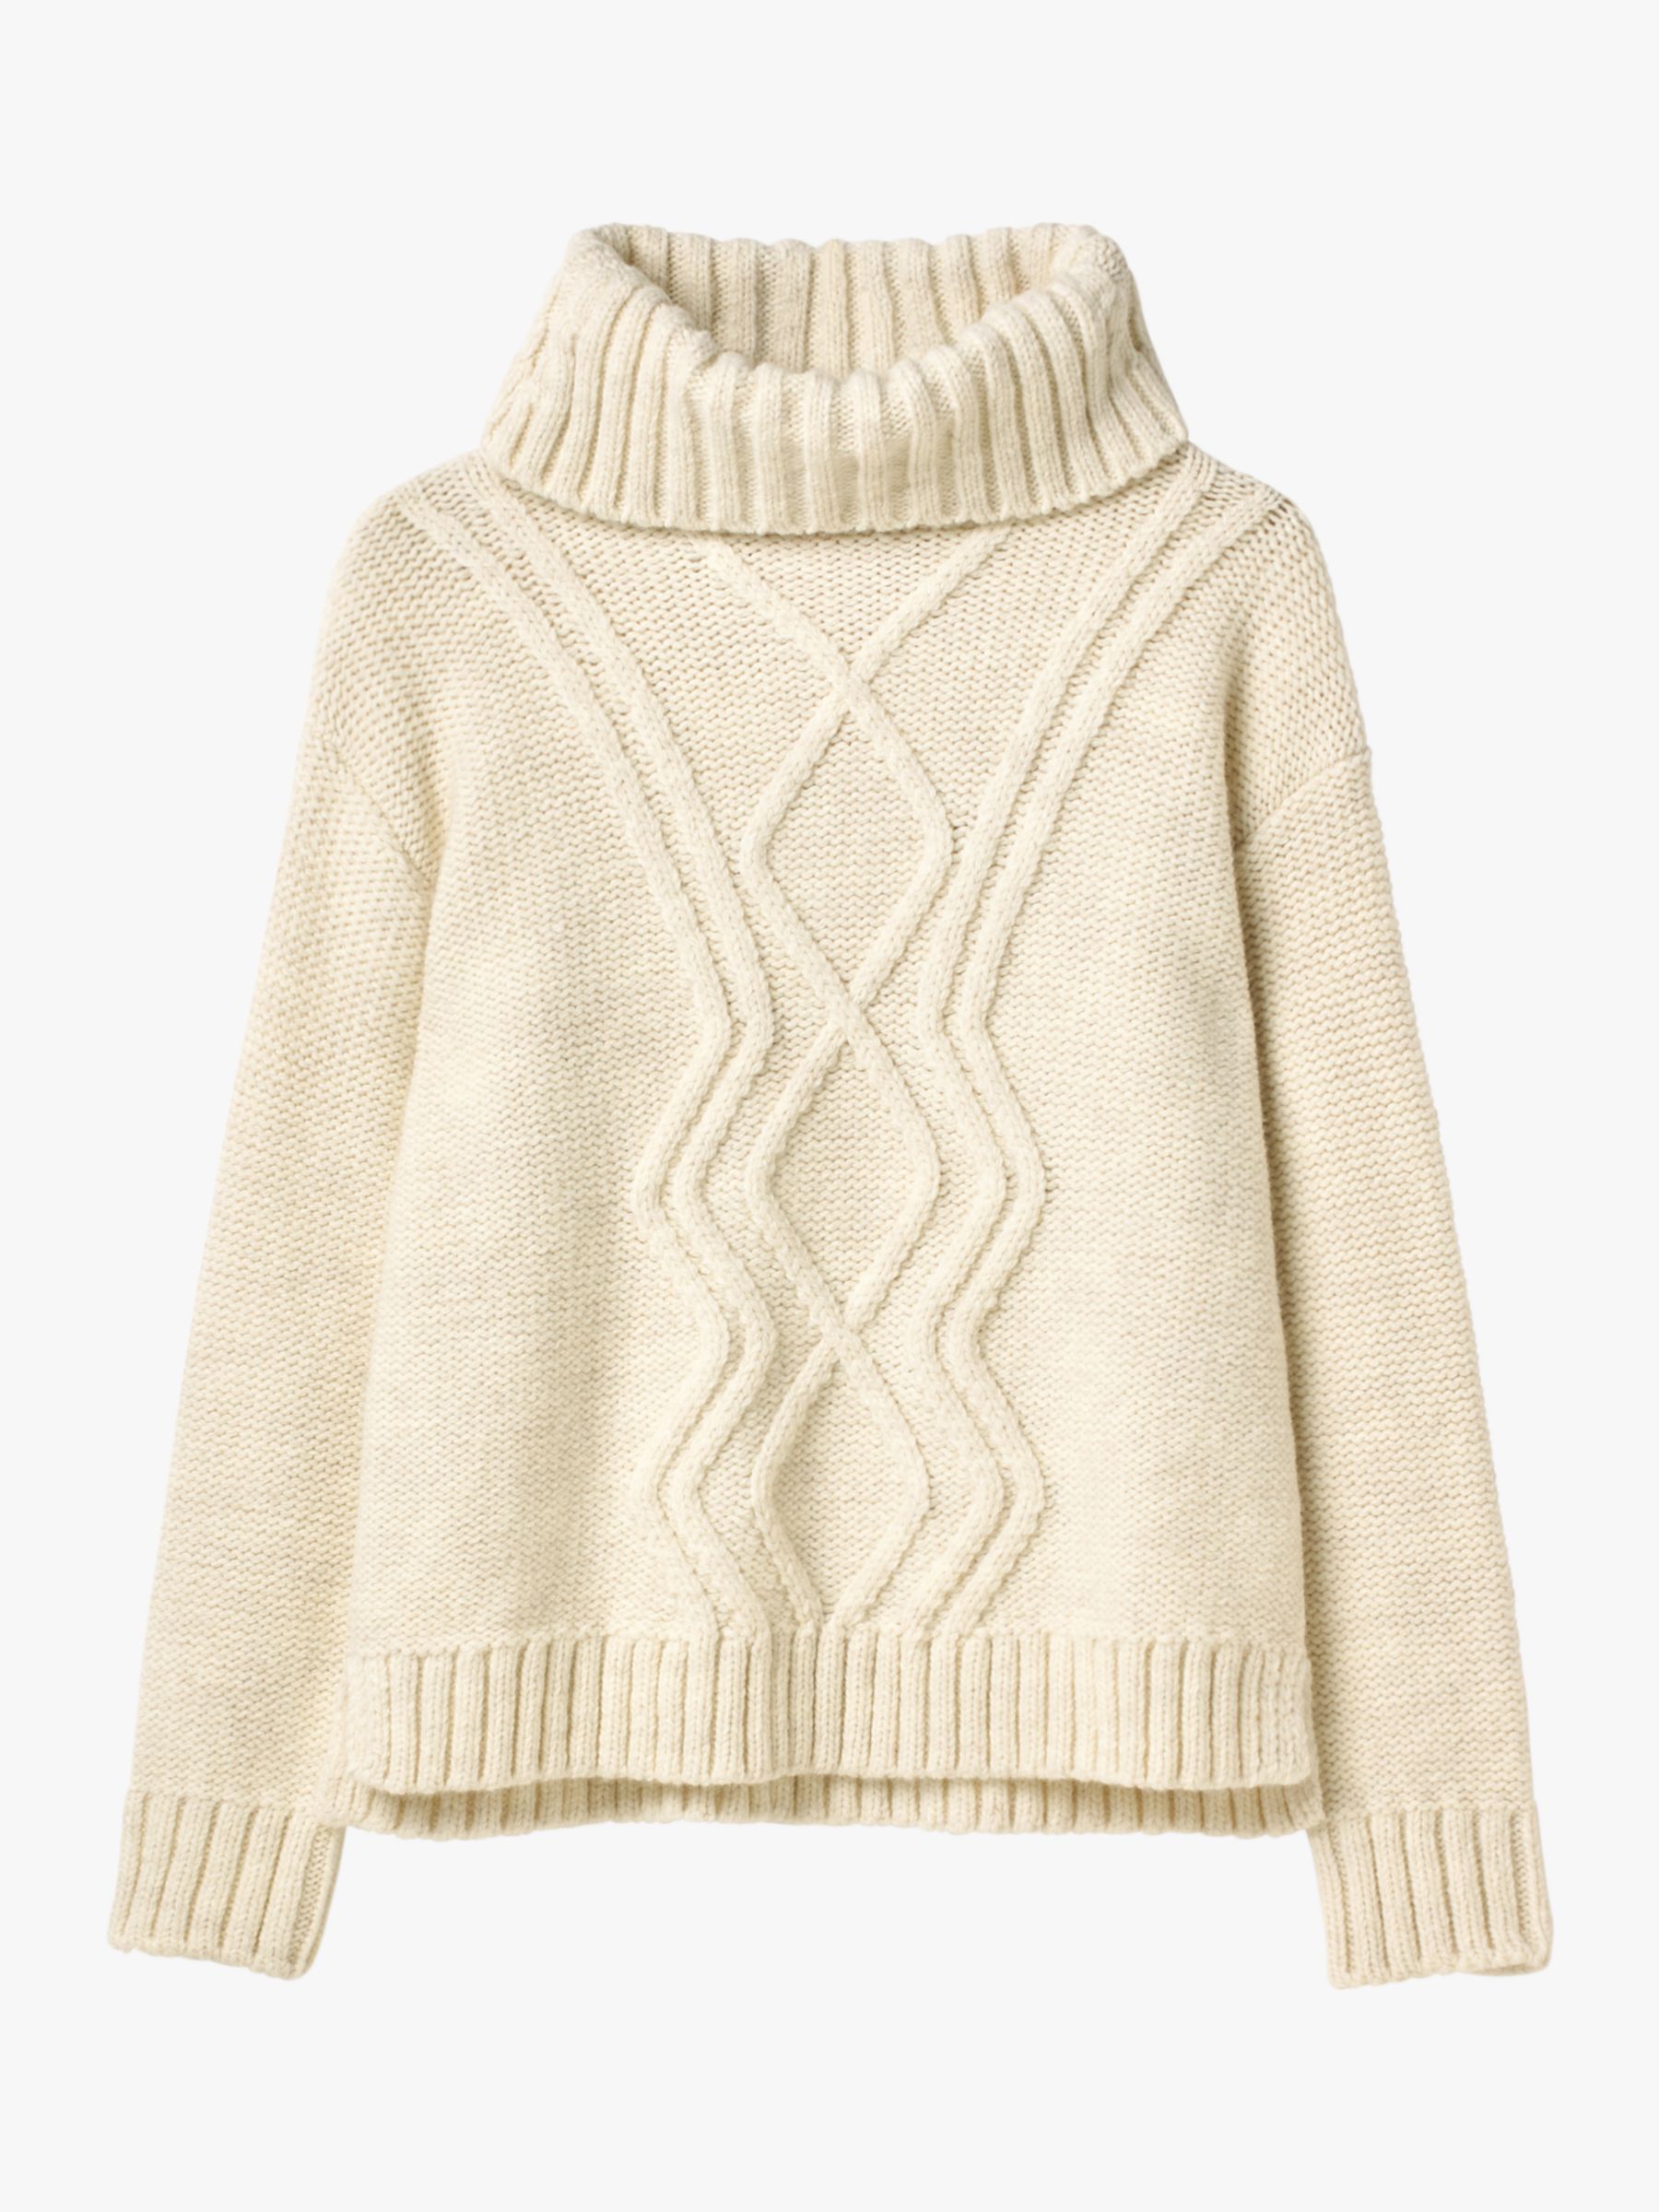 White Stuff Arley Cable Knit Jumper